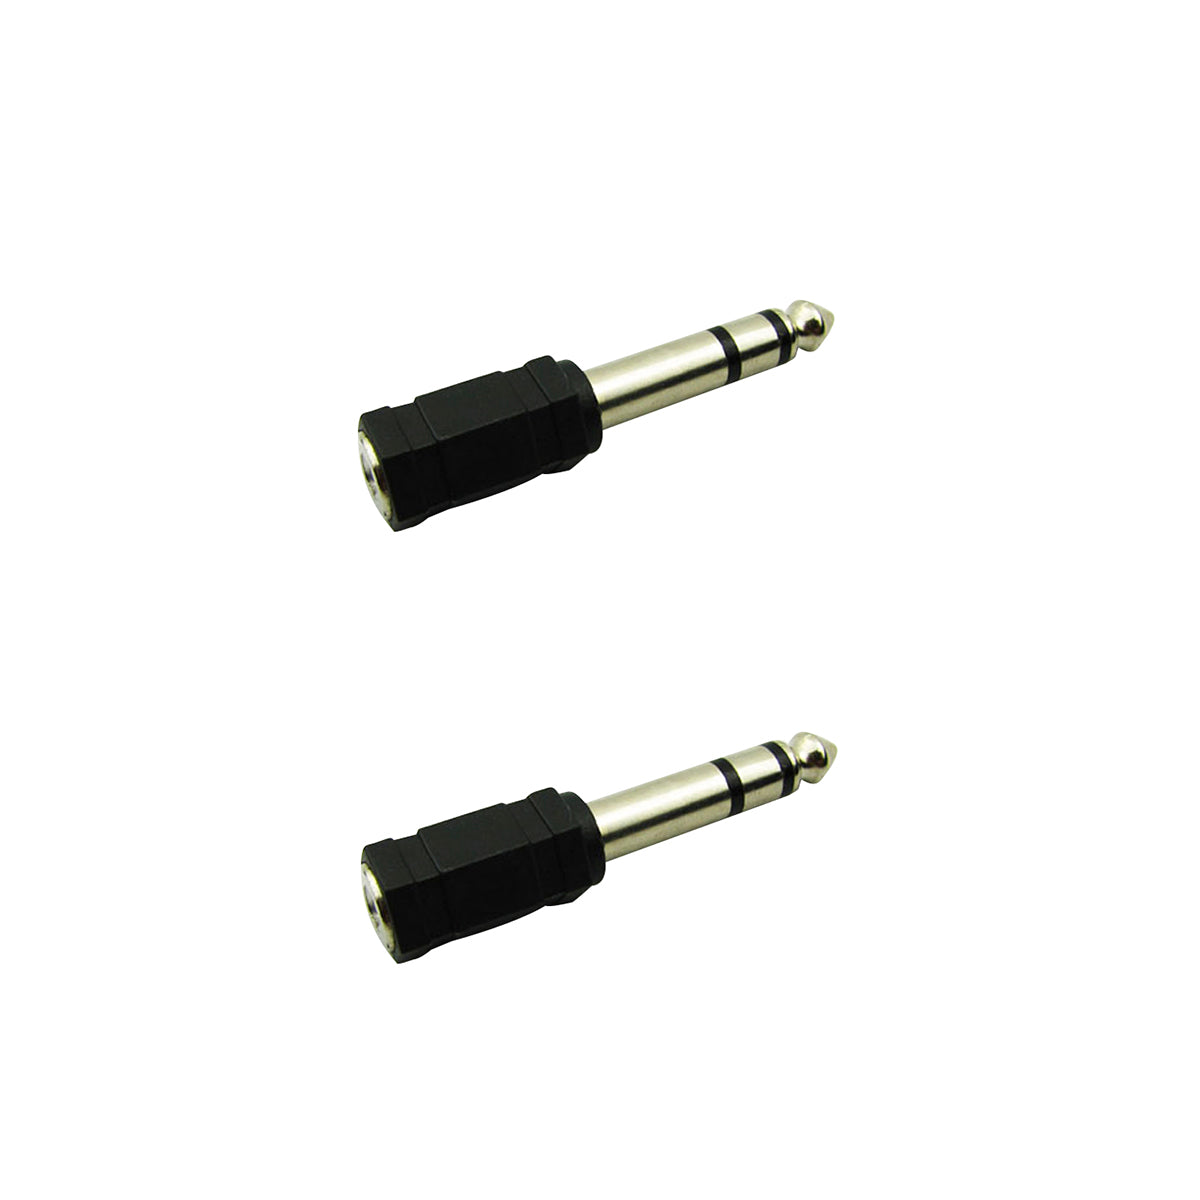 Musiclily Professional 3.5mm Female Plug to 6.35mm Male Jack Audio Stereo adapter Converter, Black( 2 Pieces£©